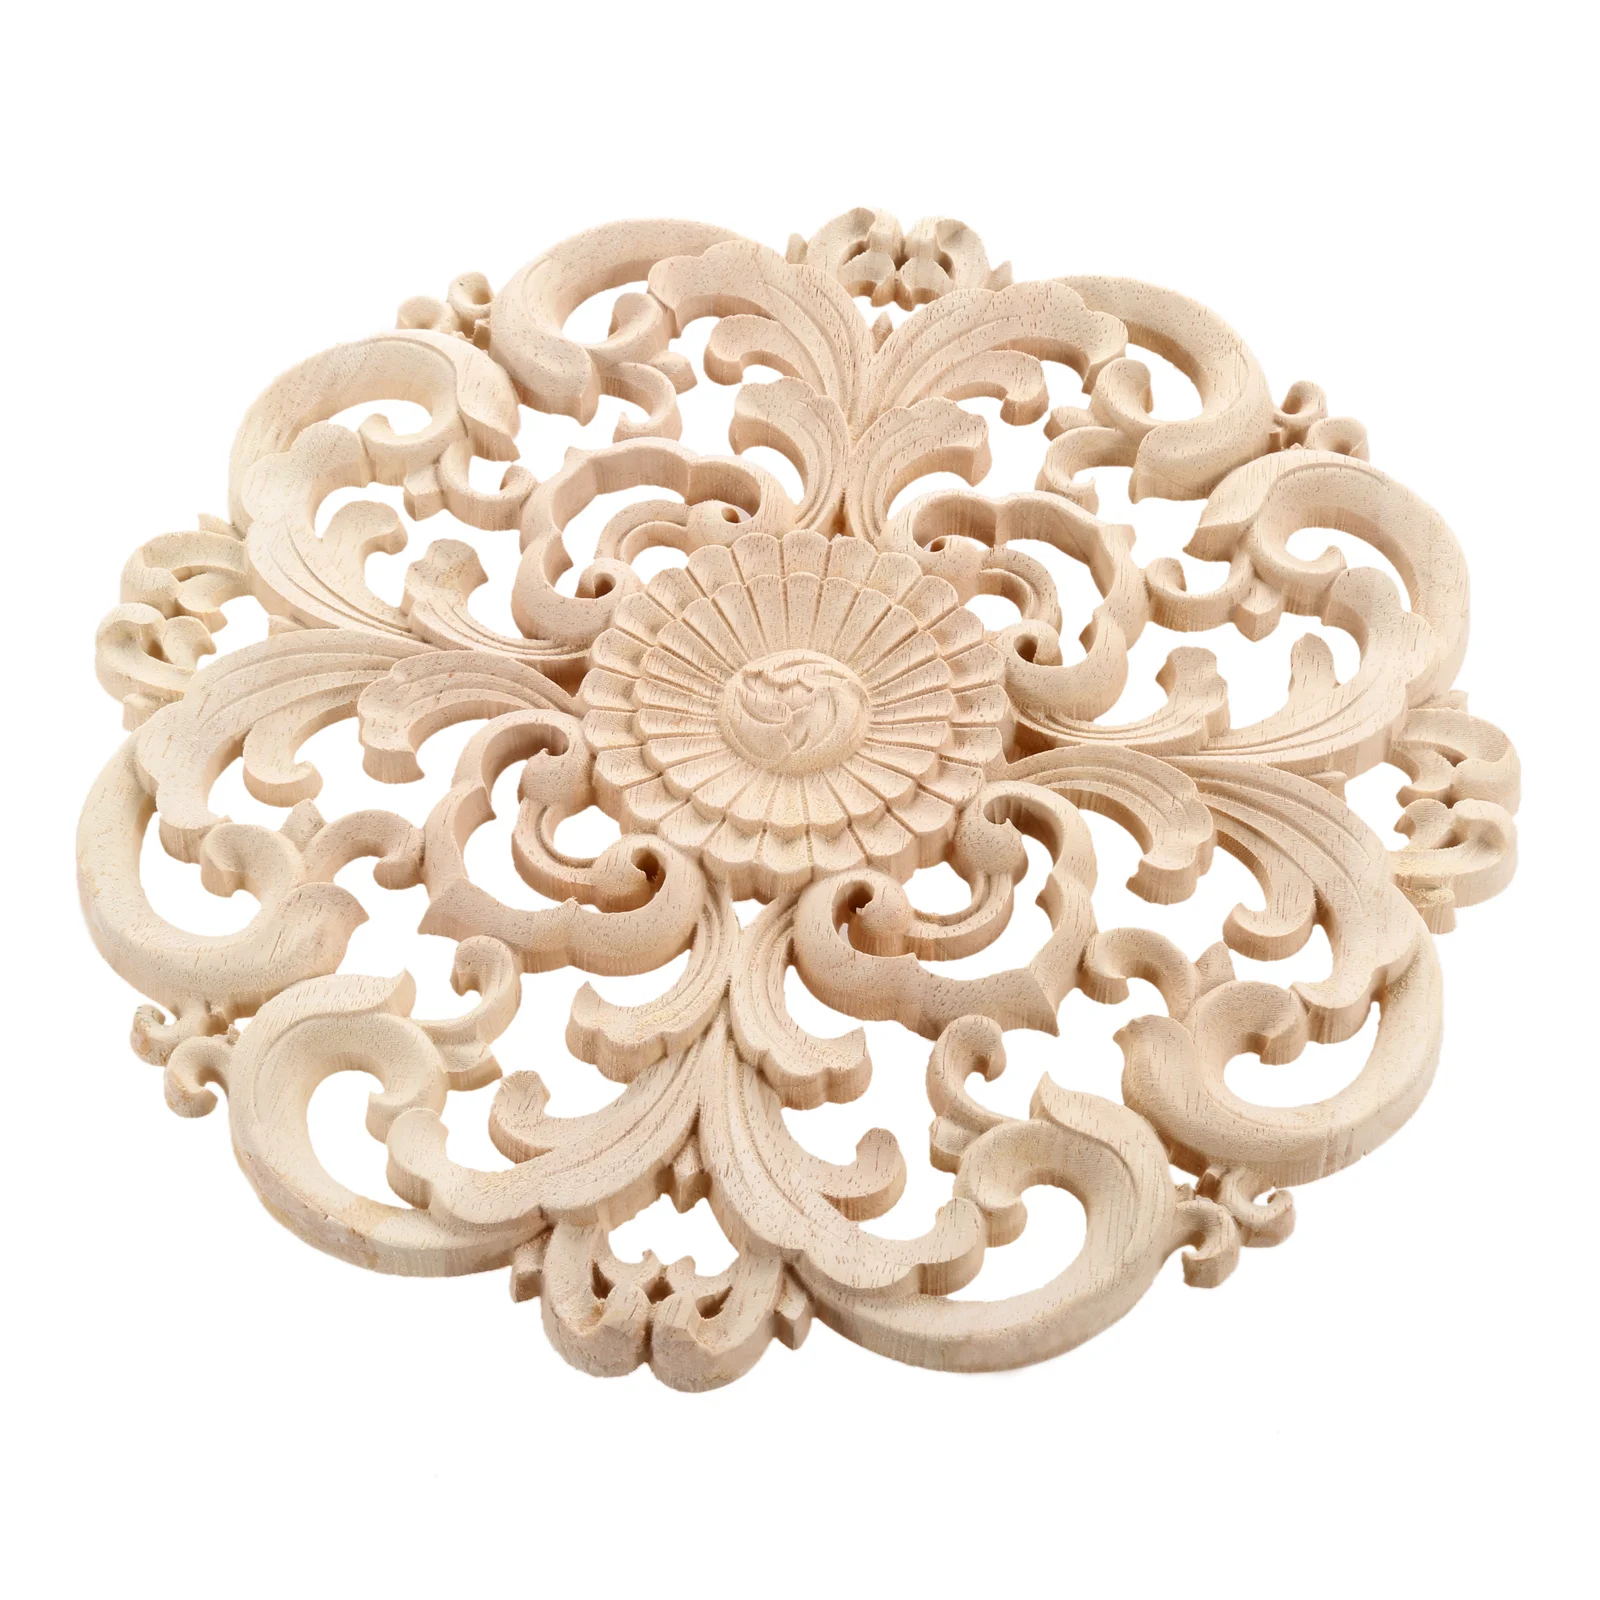 

Carved Flower Carving Round Wood Appliques for Furniture Cabinet Unpainted Wooden Mouldings Decal Decorative Figurine20/24/30cm